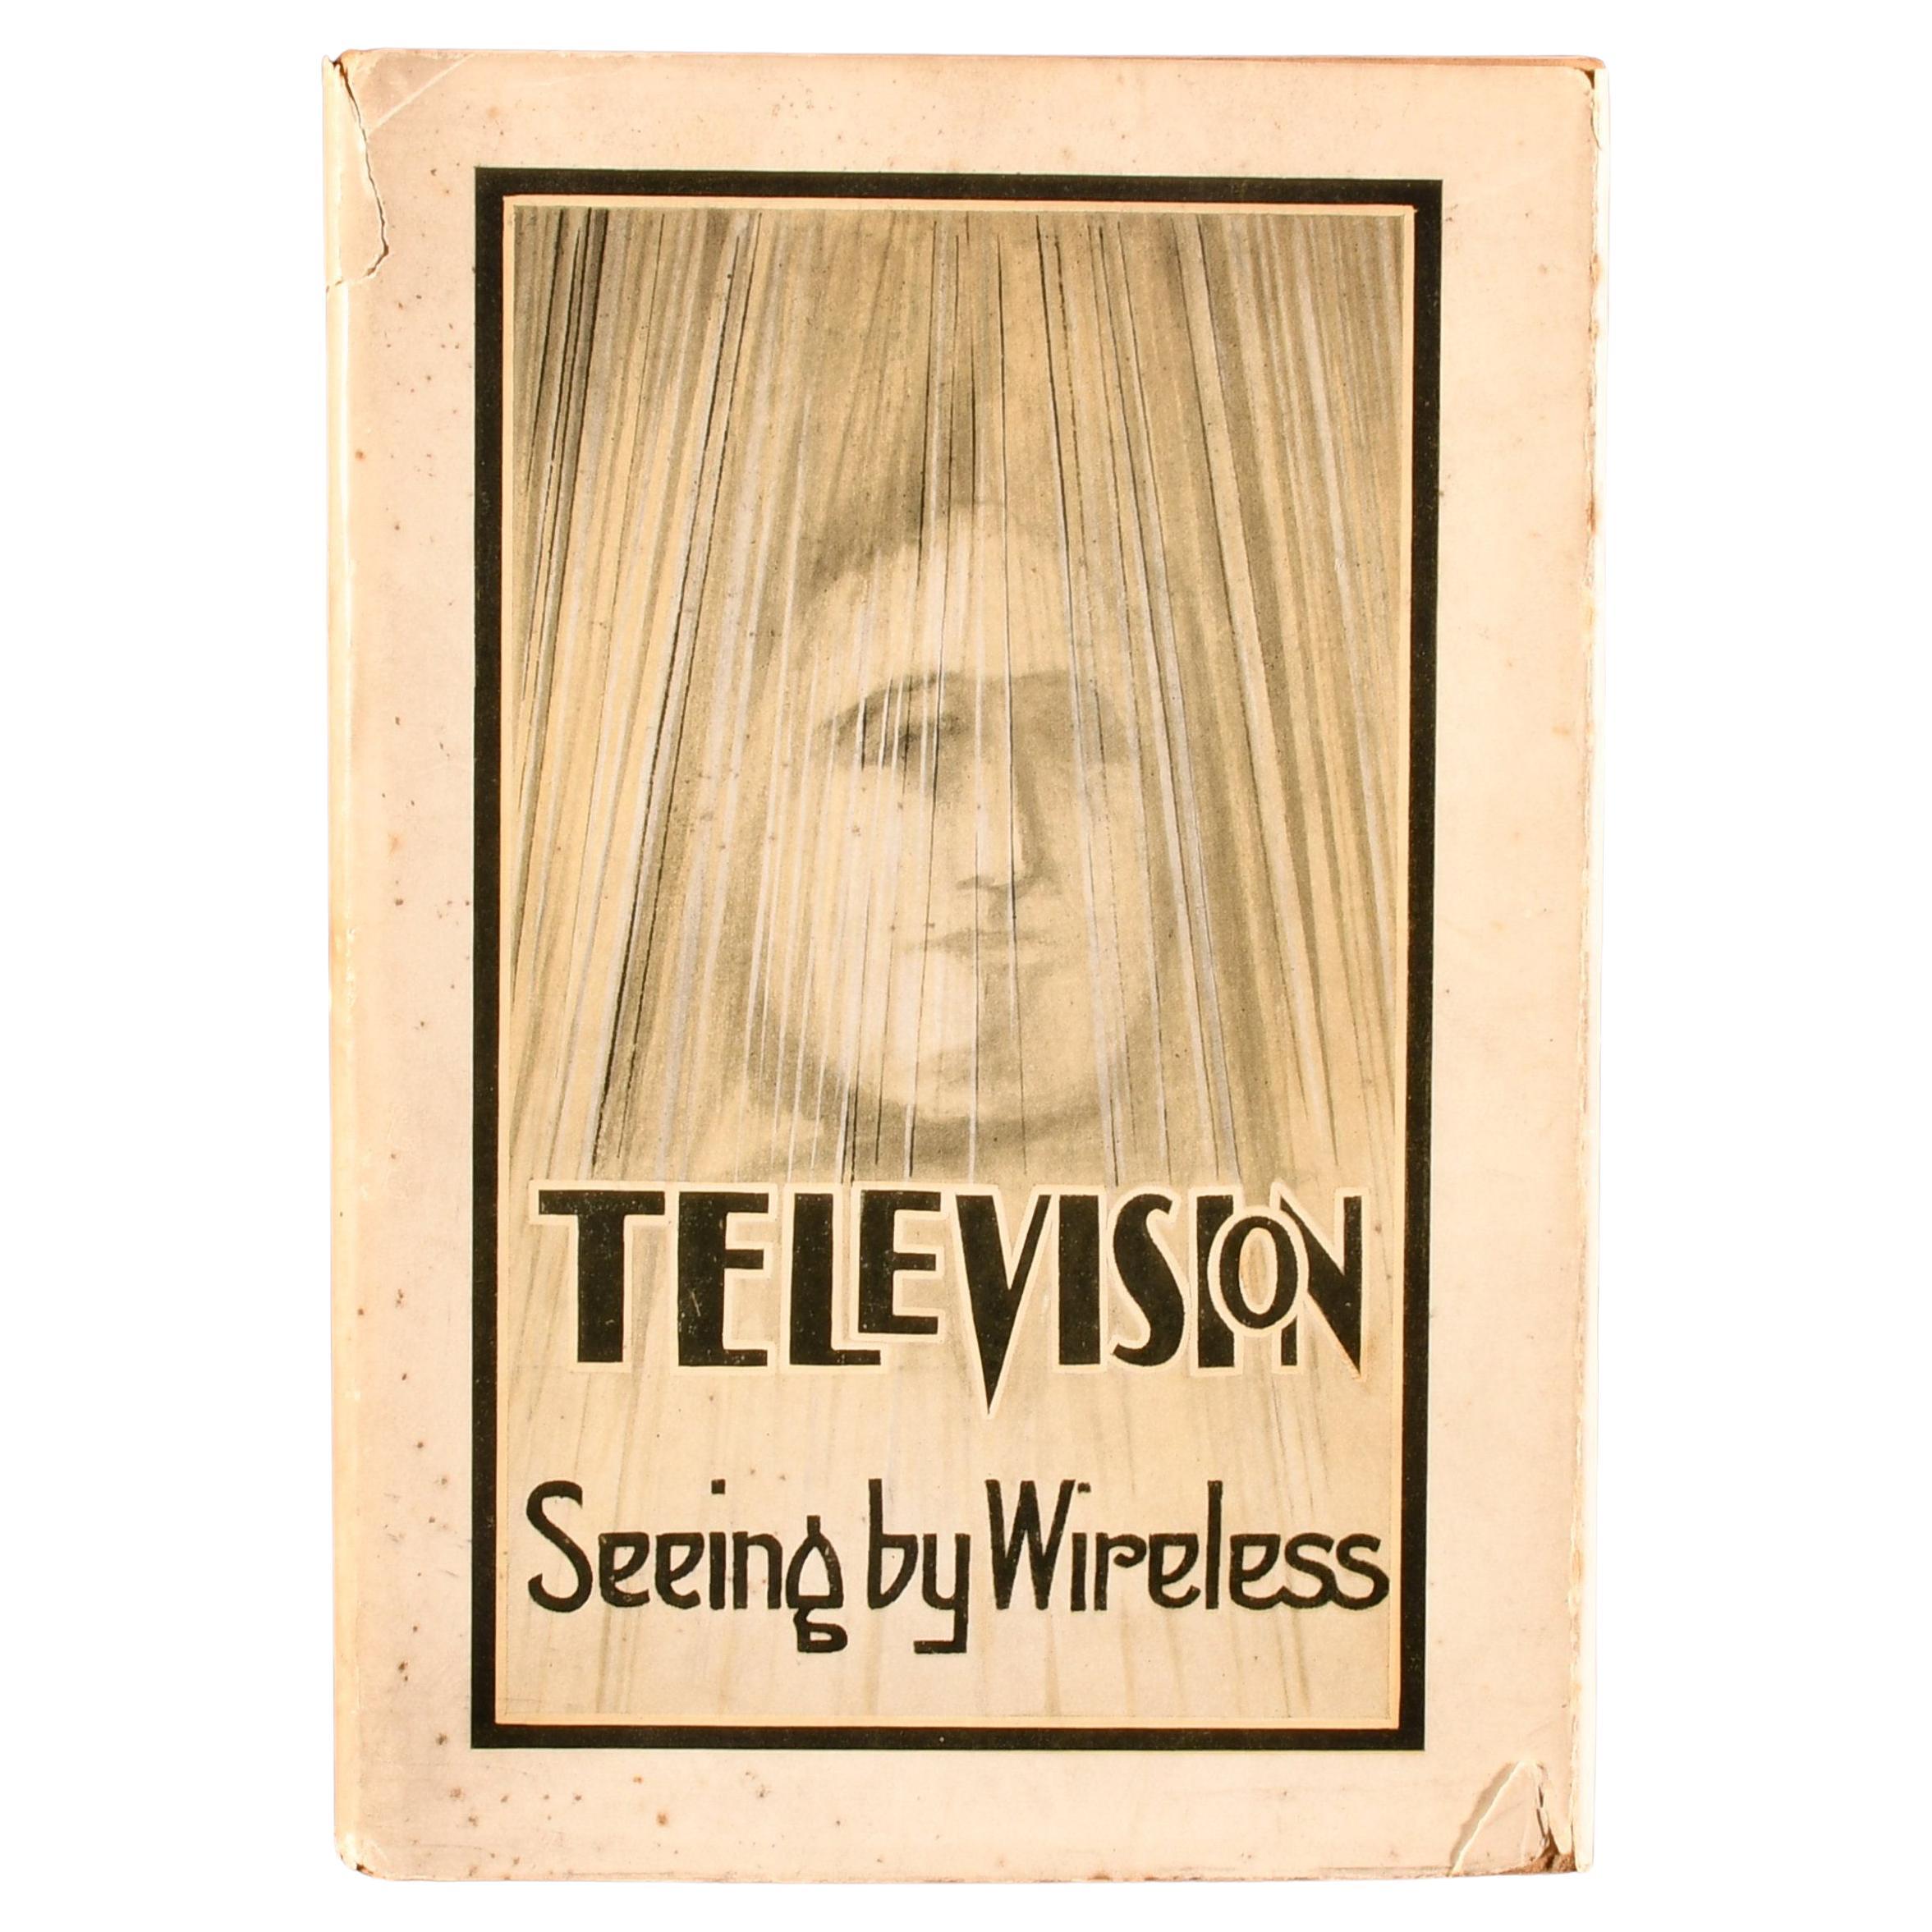 1926 Television (Seeing by Wire or Wireless) by Alfred Dinsdale For Sale